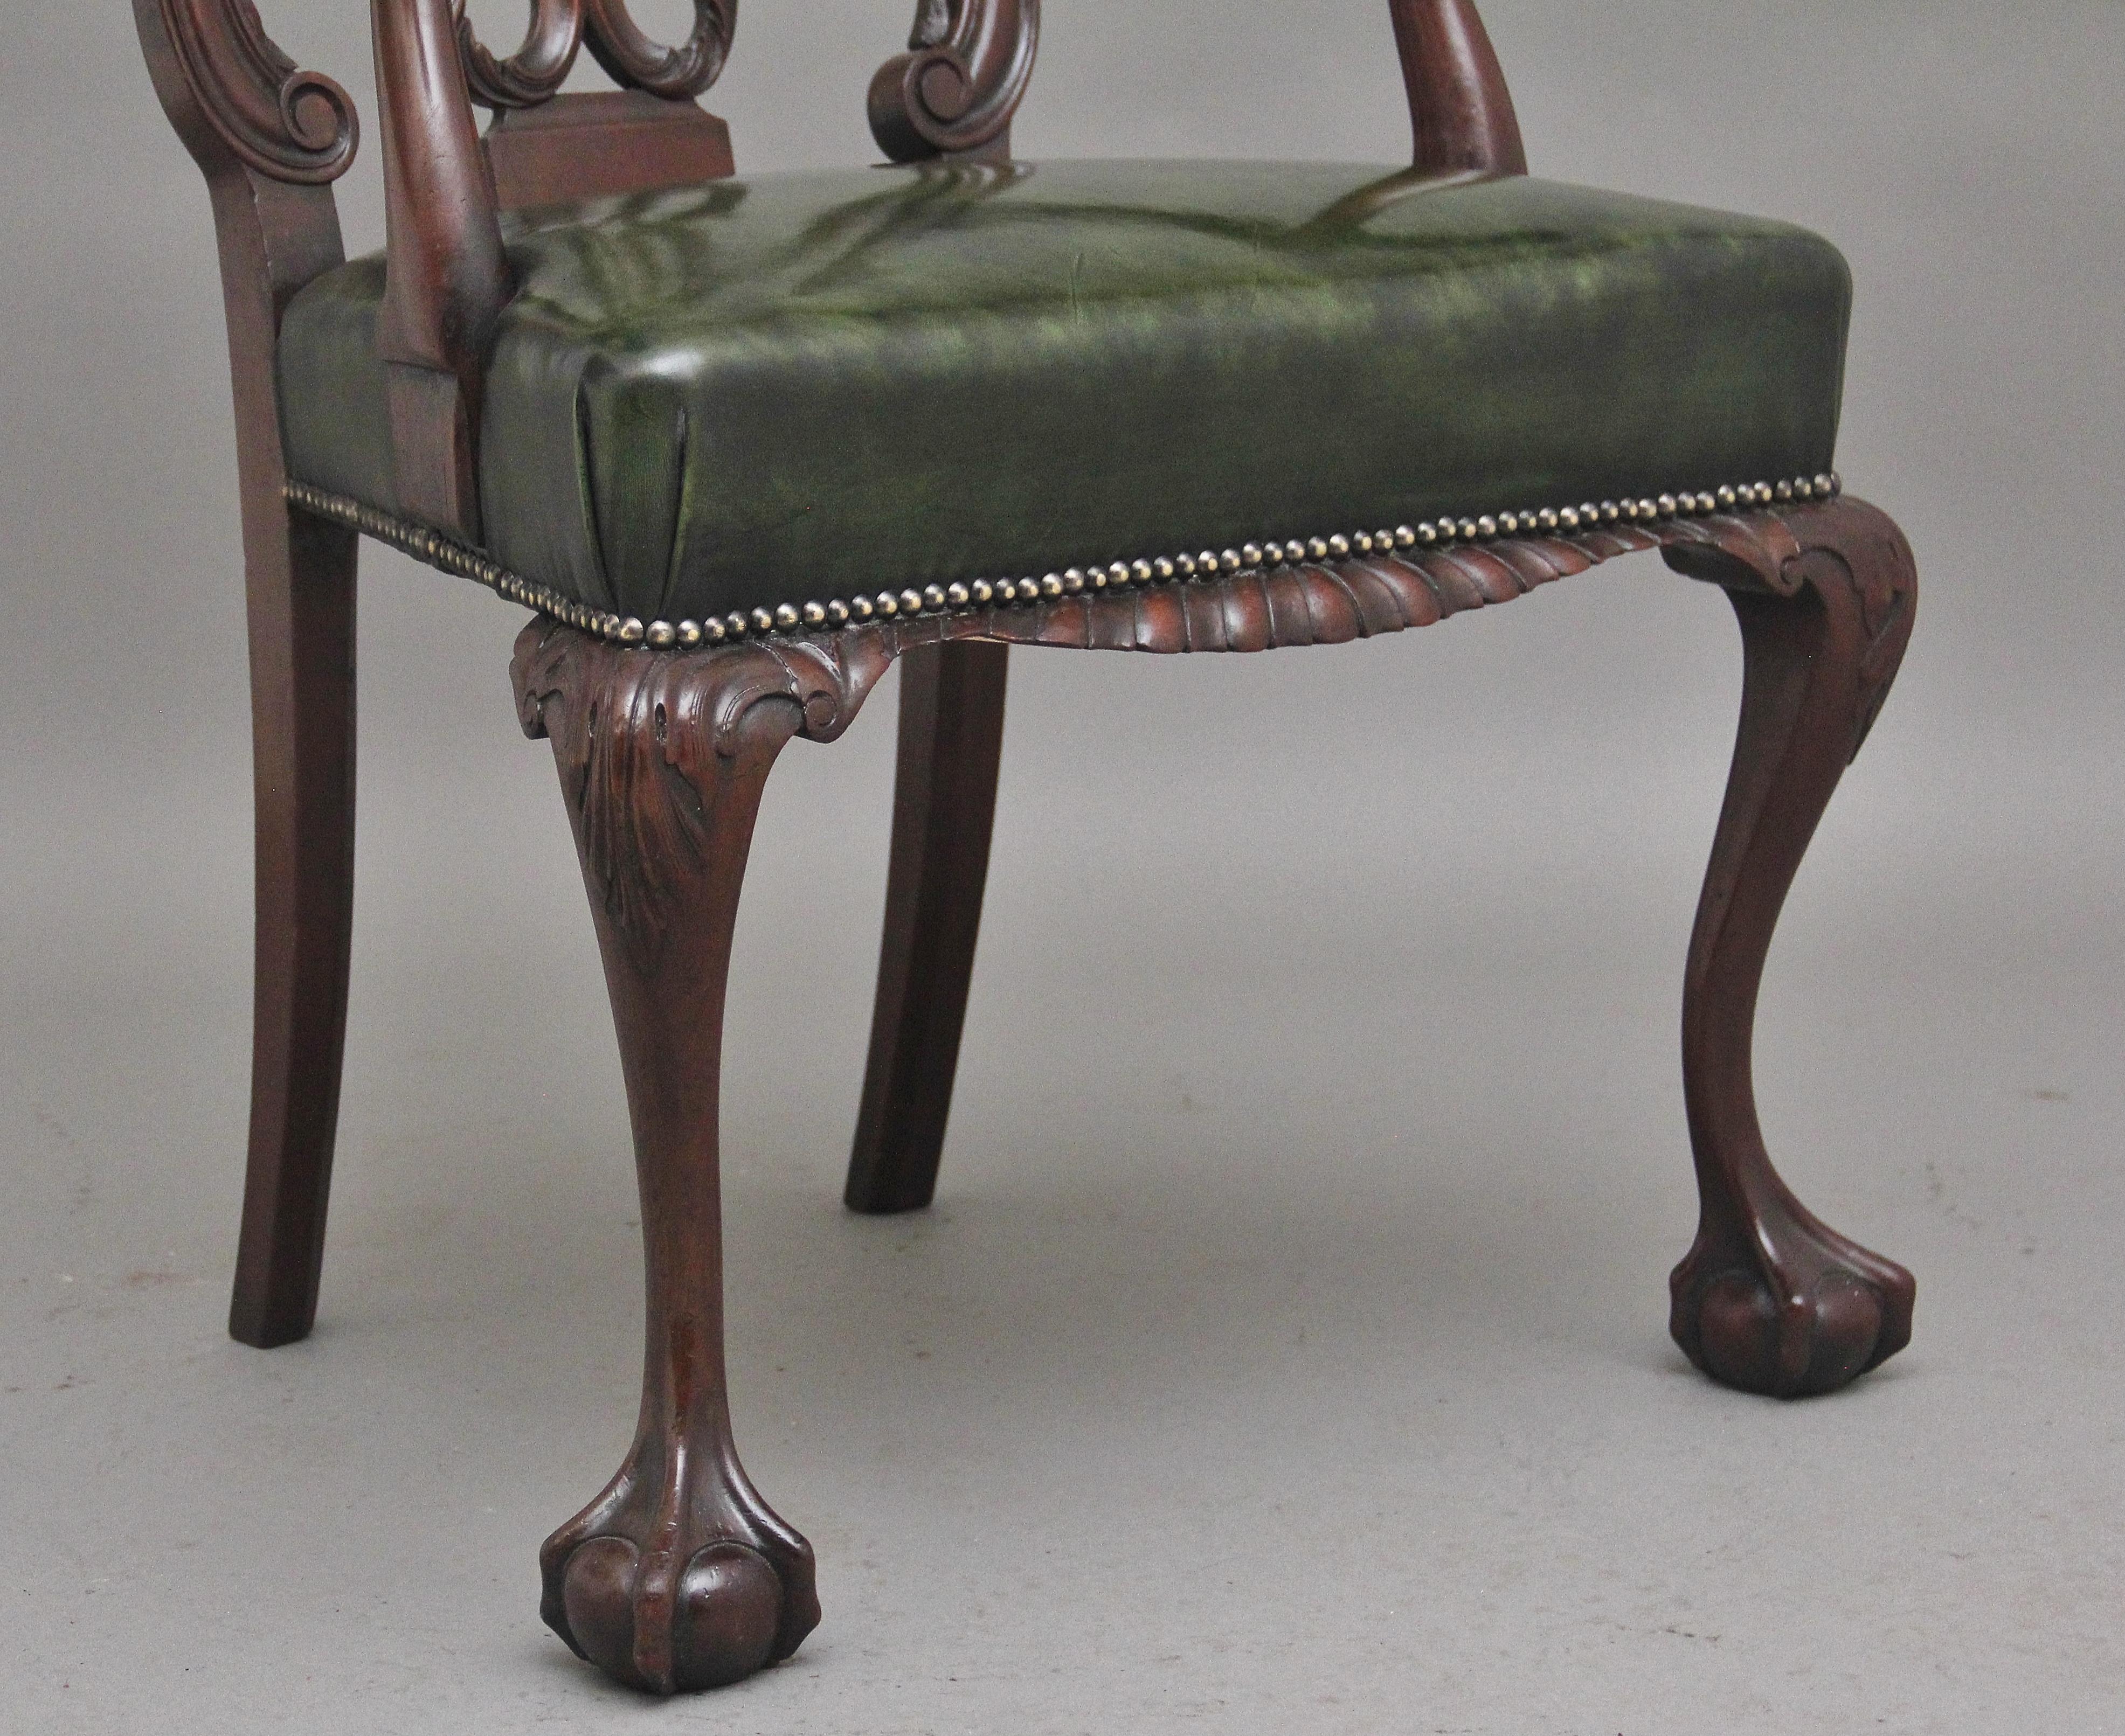 A highly decorative early 20th Century carved mahogany armchair in the Chippendale style, having a wonderfully carved and pierced back splat, the slender curved supports with scroll decoration on the front of the arms, having a re-upholstered